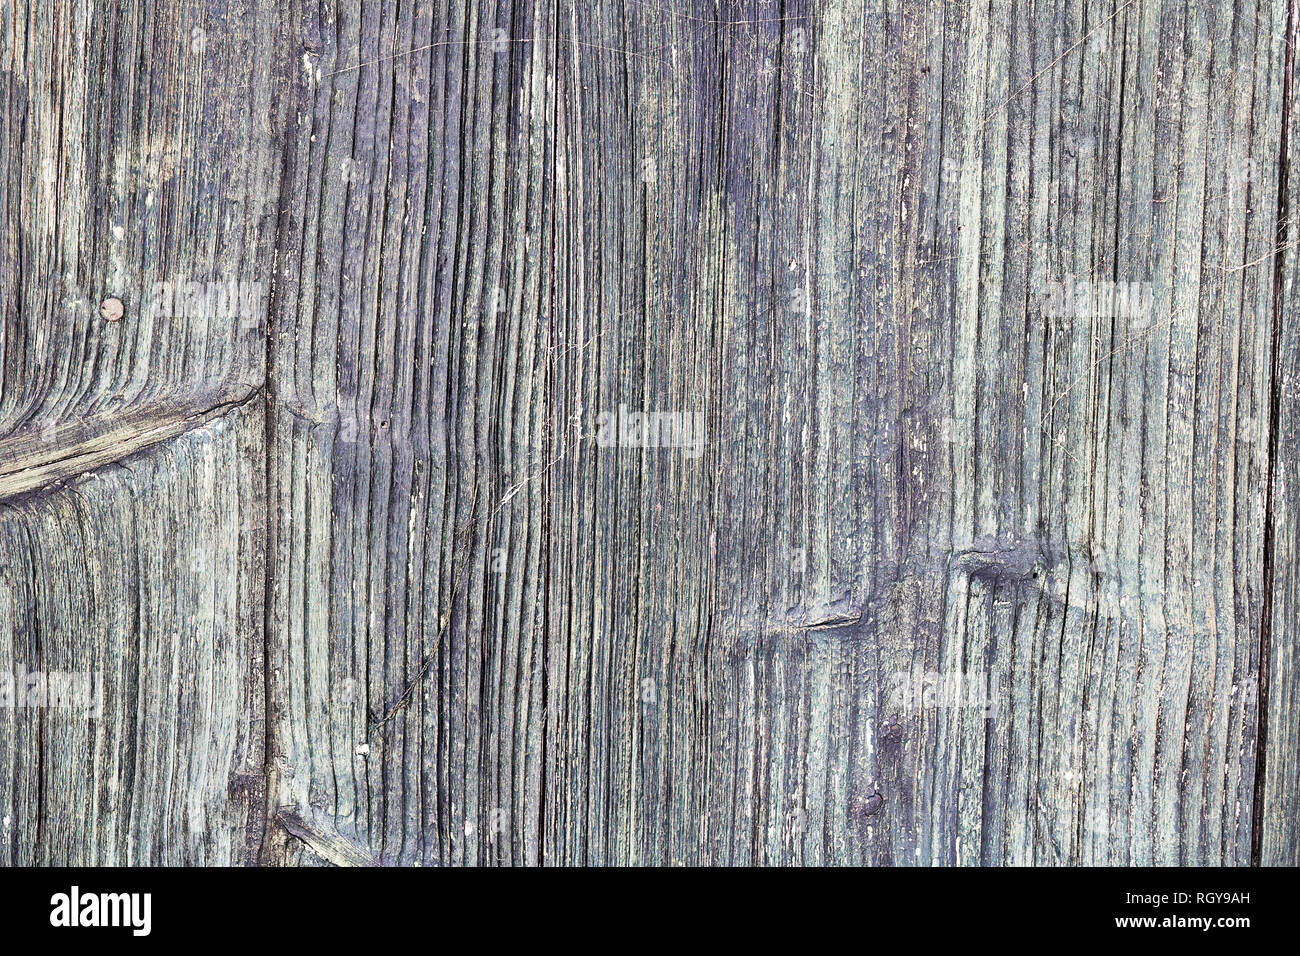 wooden texture of old plank ready for your design Stock Photo